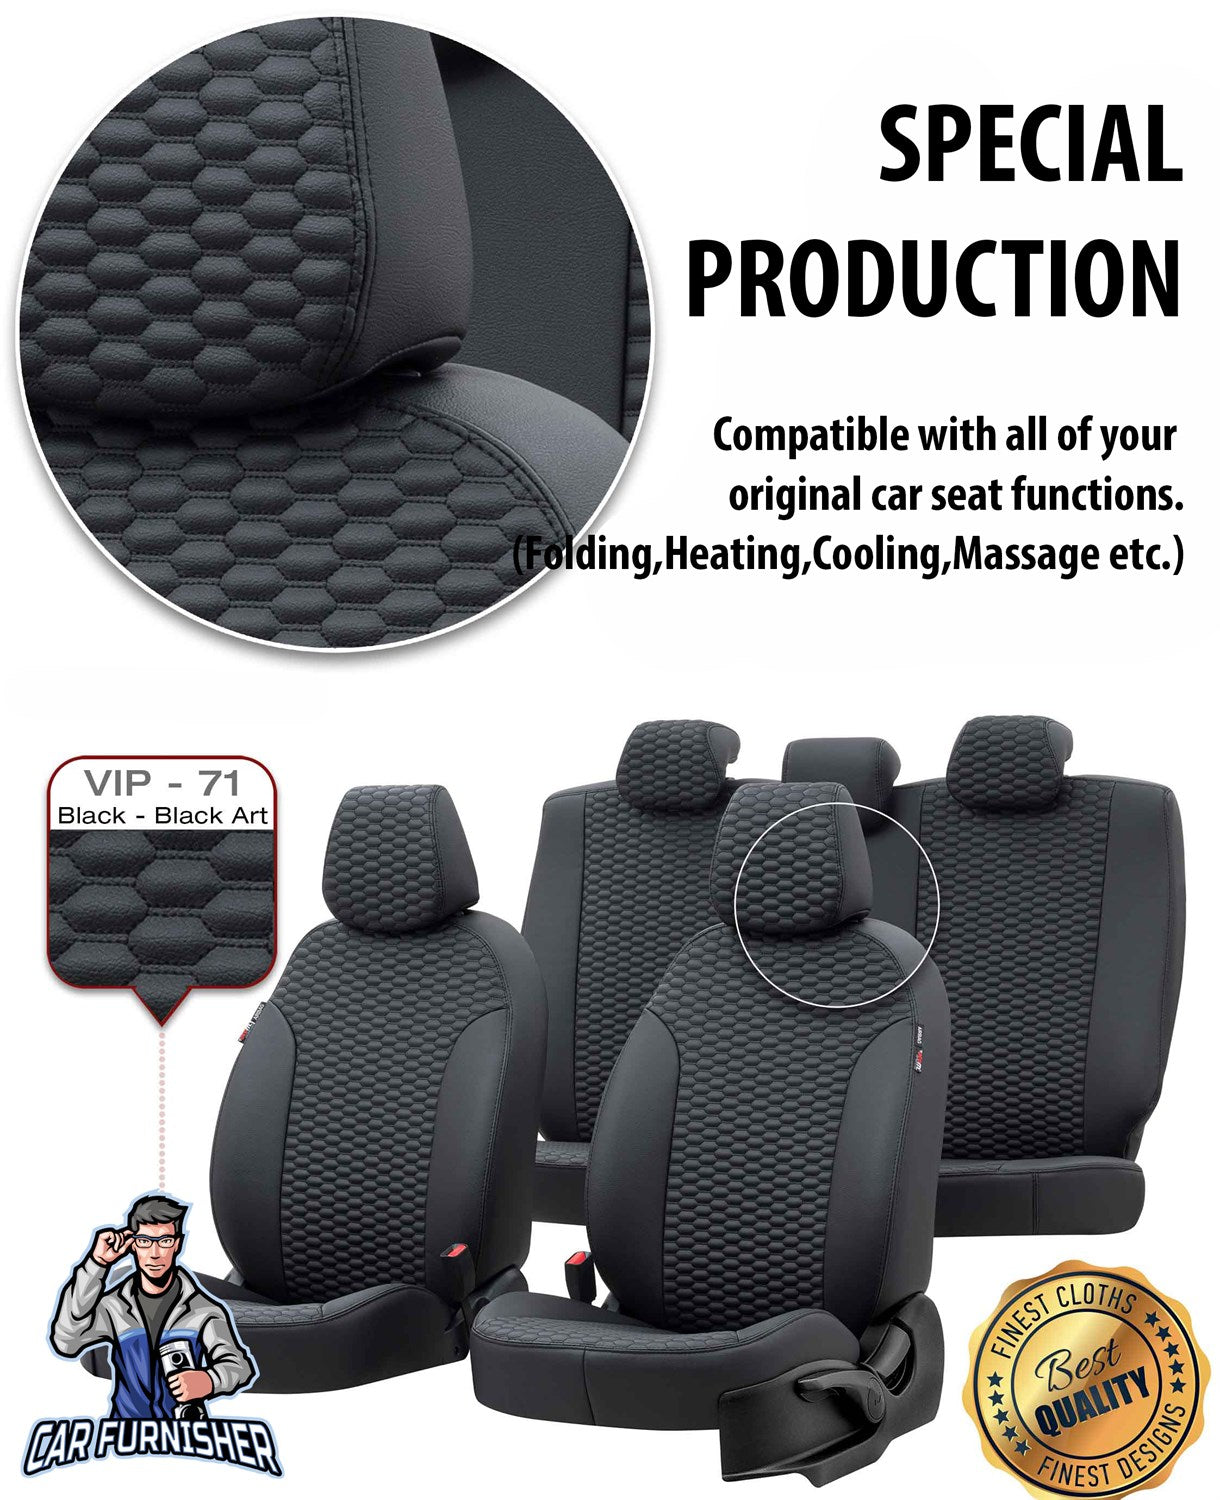 Man TGS Seat Cover Tokyo Leather Design Dark Gray Front Seats (2 Seats + Handrest + Headrests) Leather